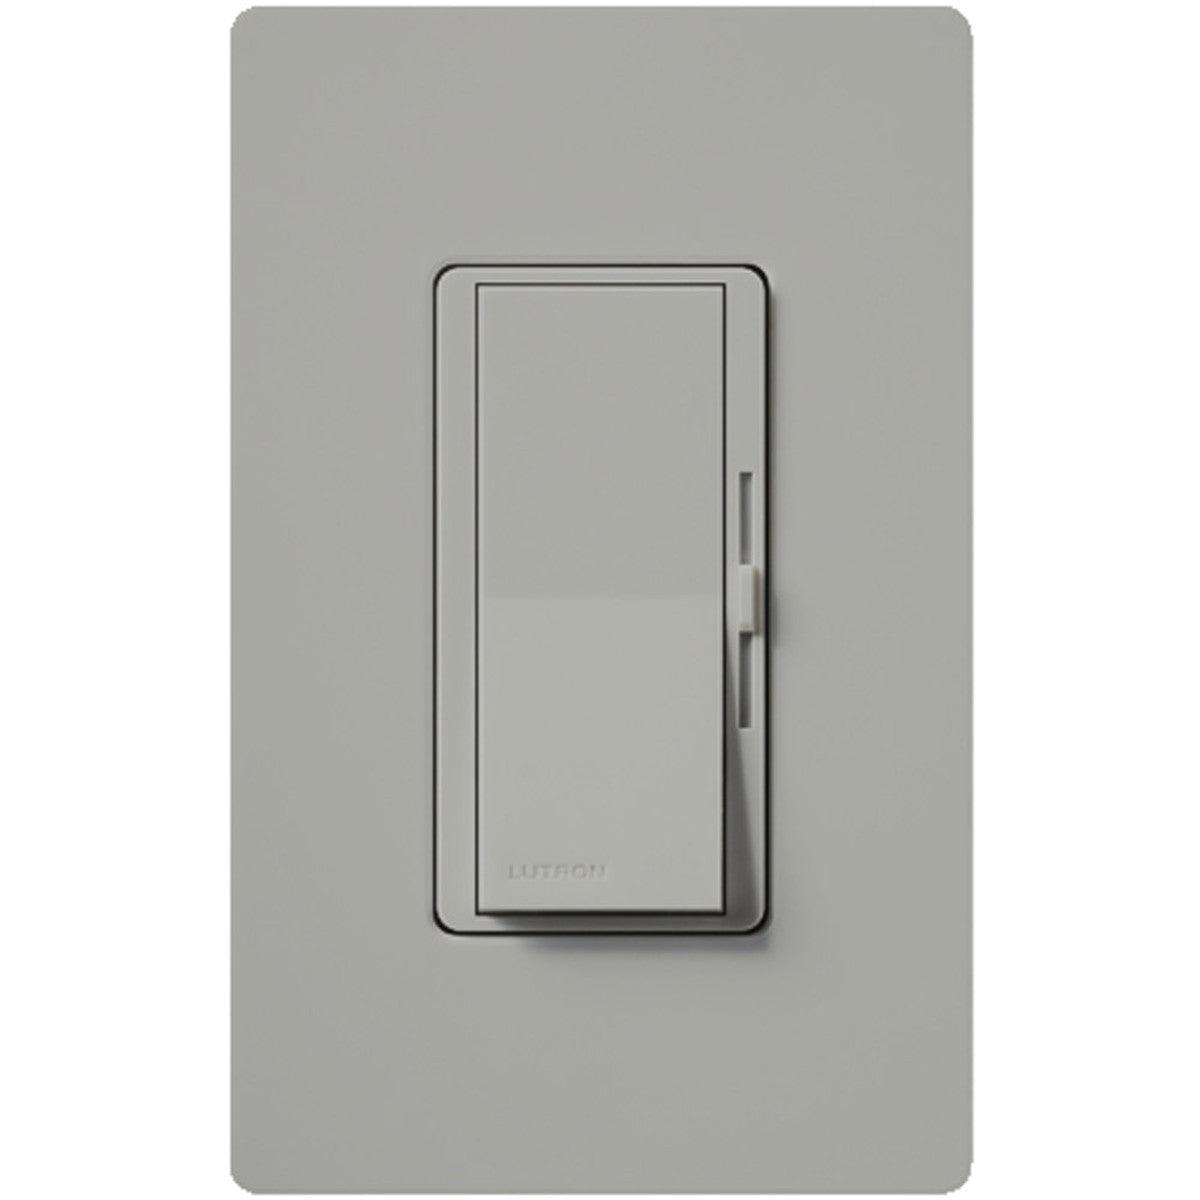 Lutron Diva Dimmer Switches and Light Switches - Bees Lighting